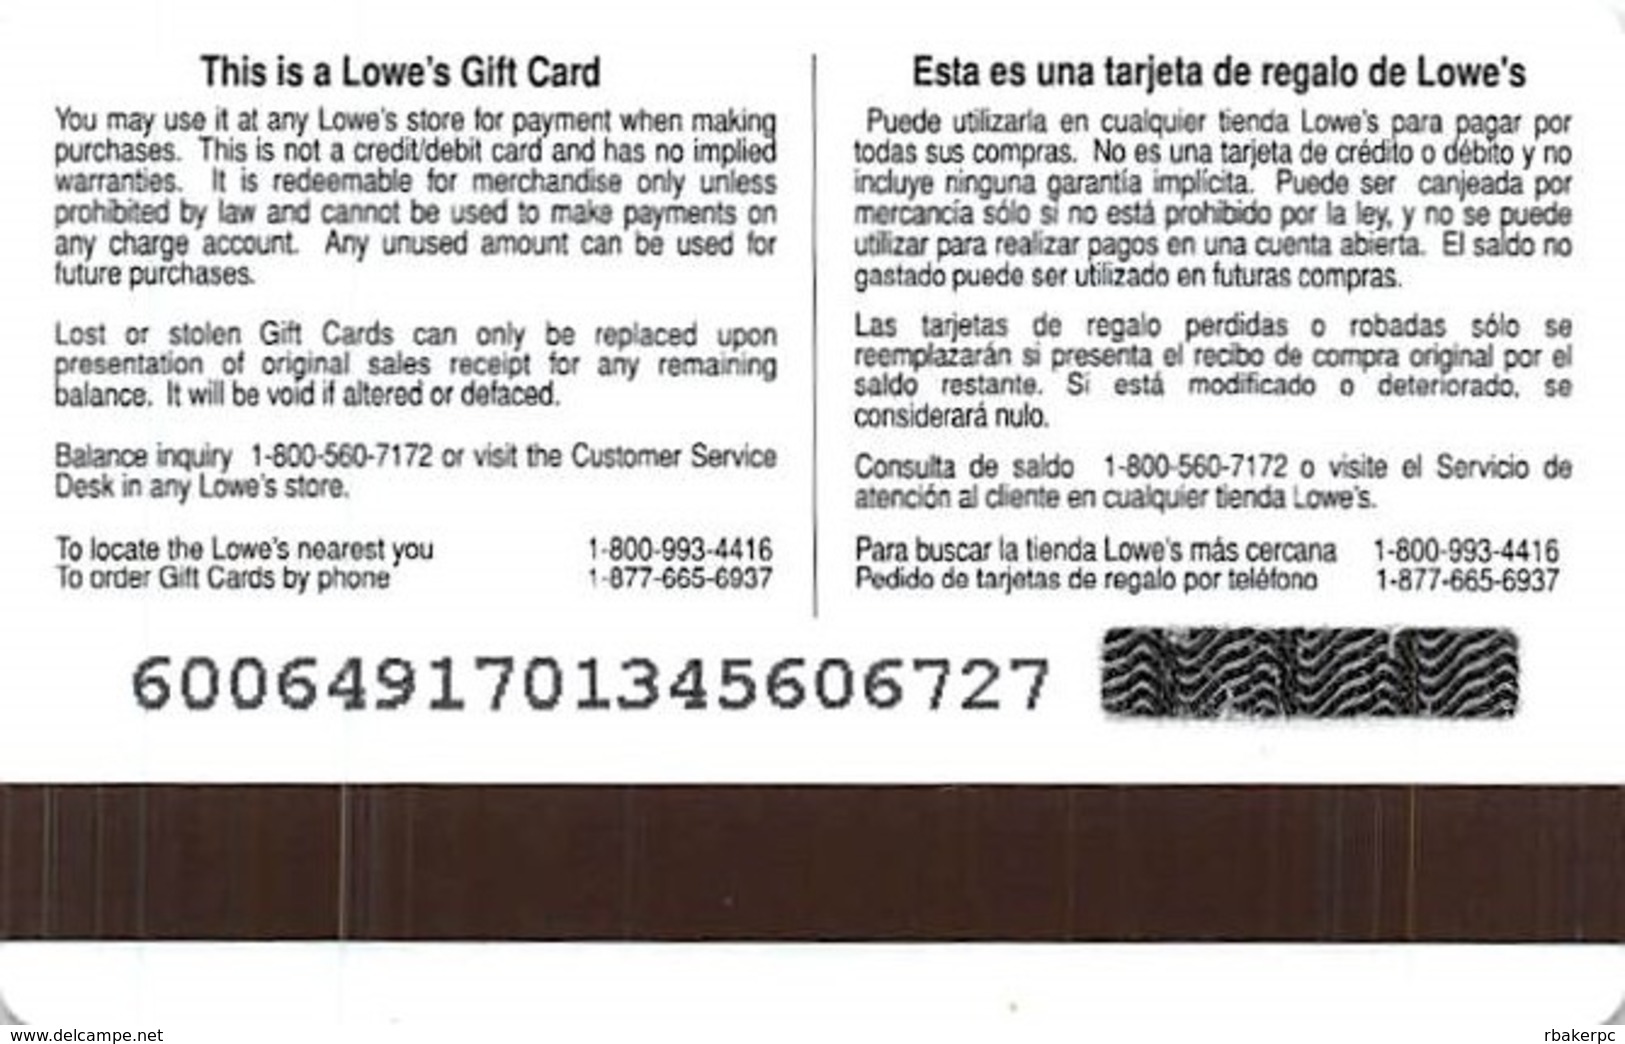 Lowes NCAA Gift Card - Tulsa Golden Hurricane - Gift Cards